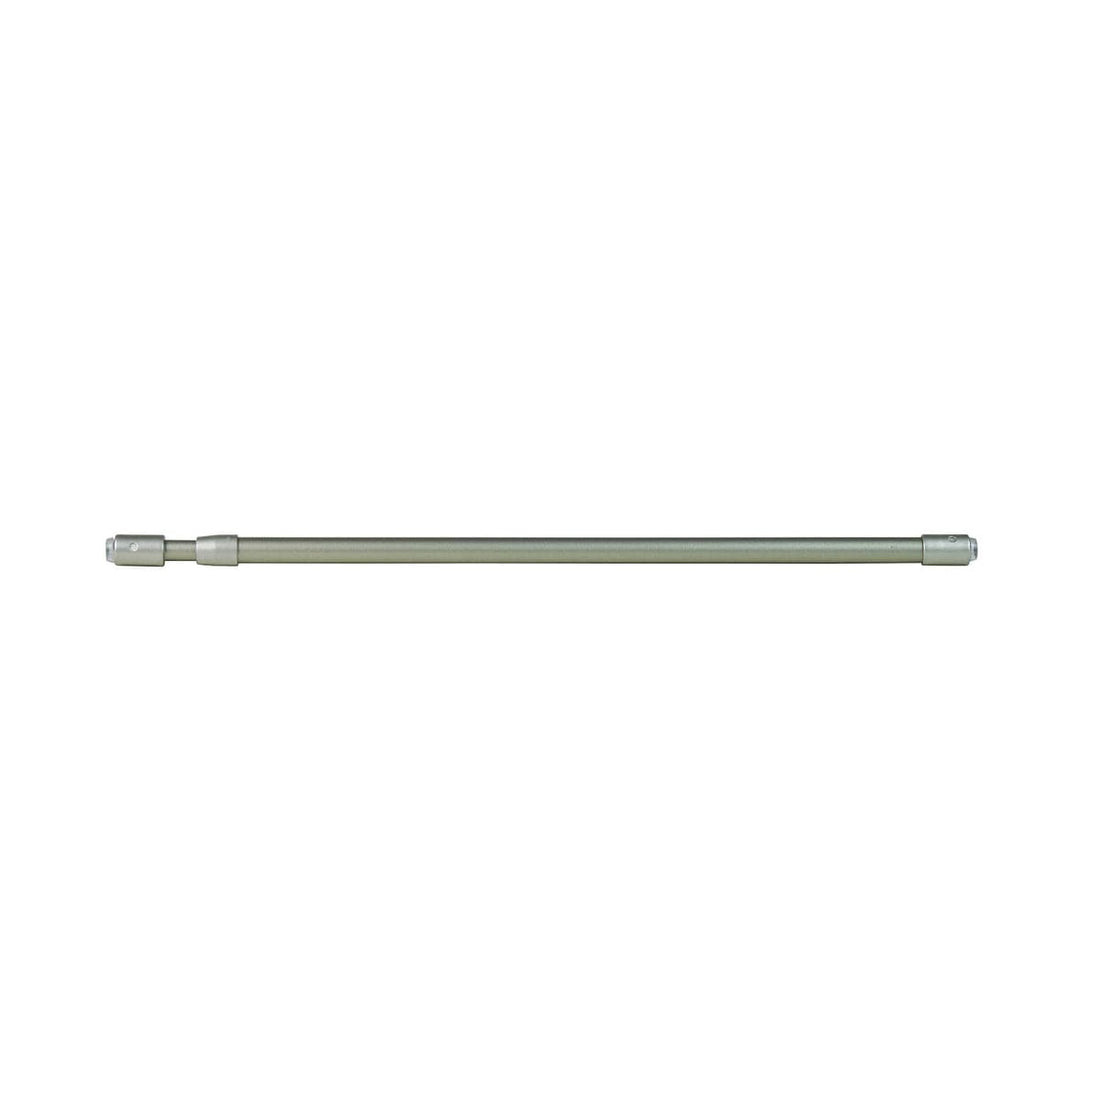 DAHLIA CURTAIN ROD WITH 50/80 NICKEL EXTENSIBLE PRESSURE POINT